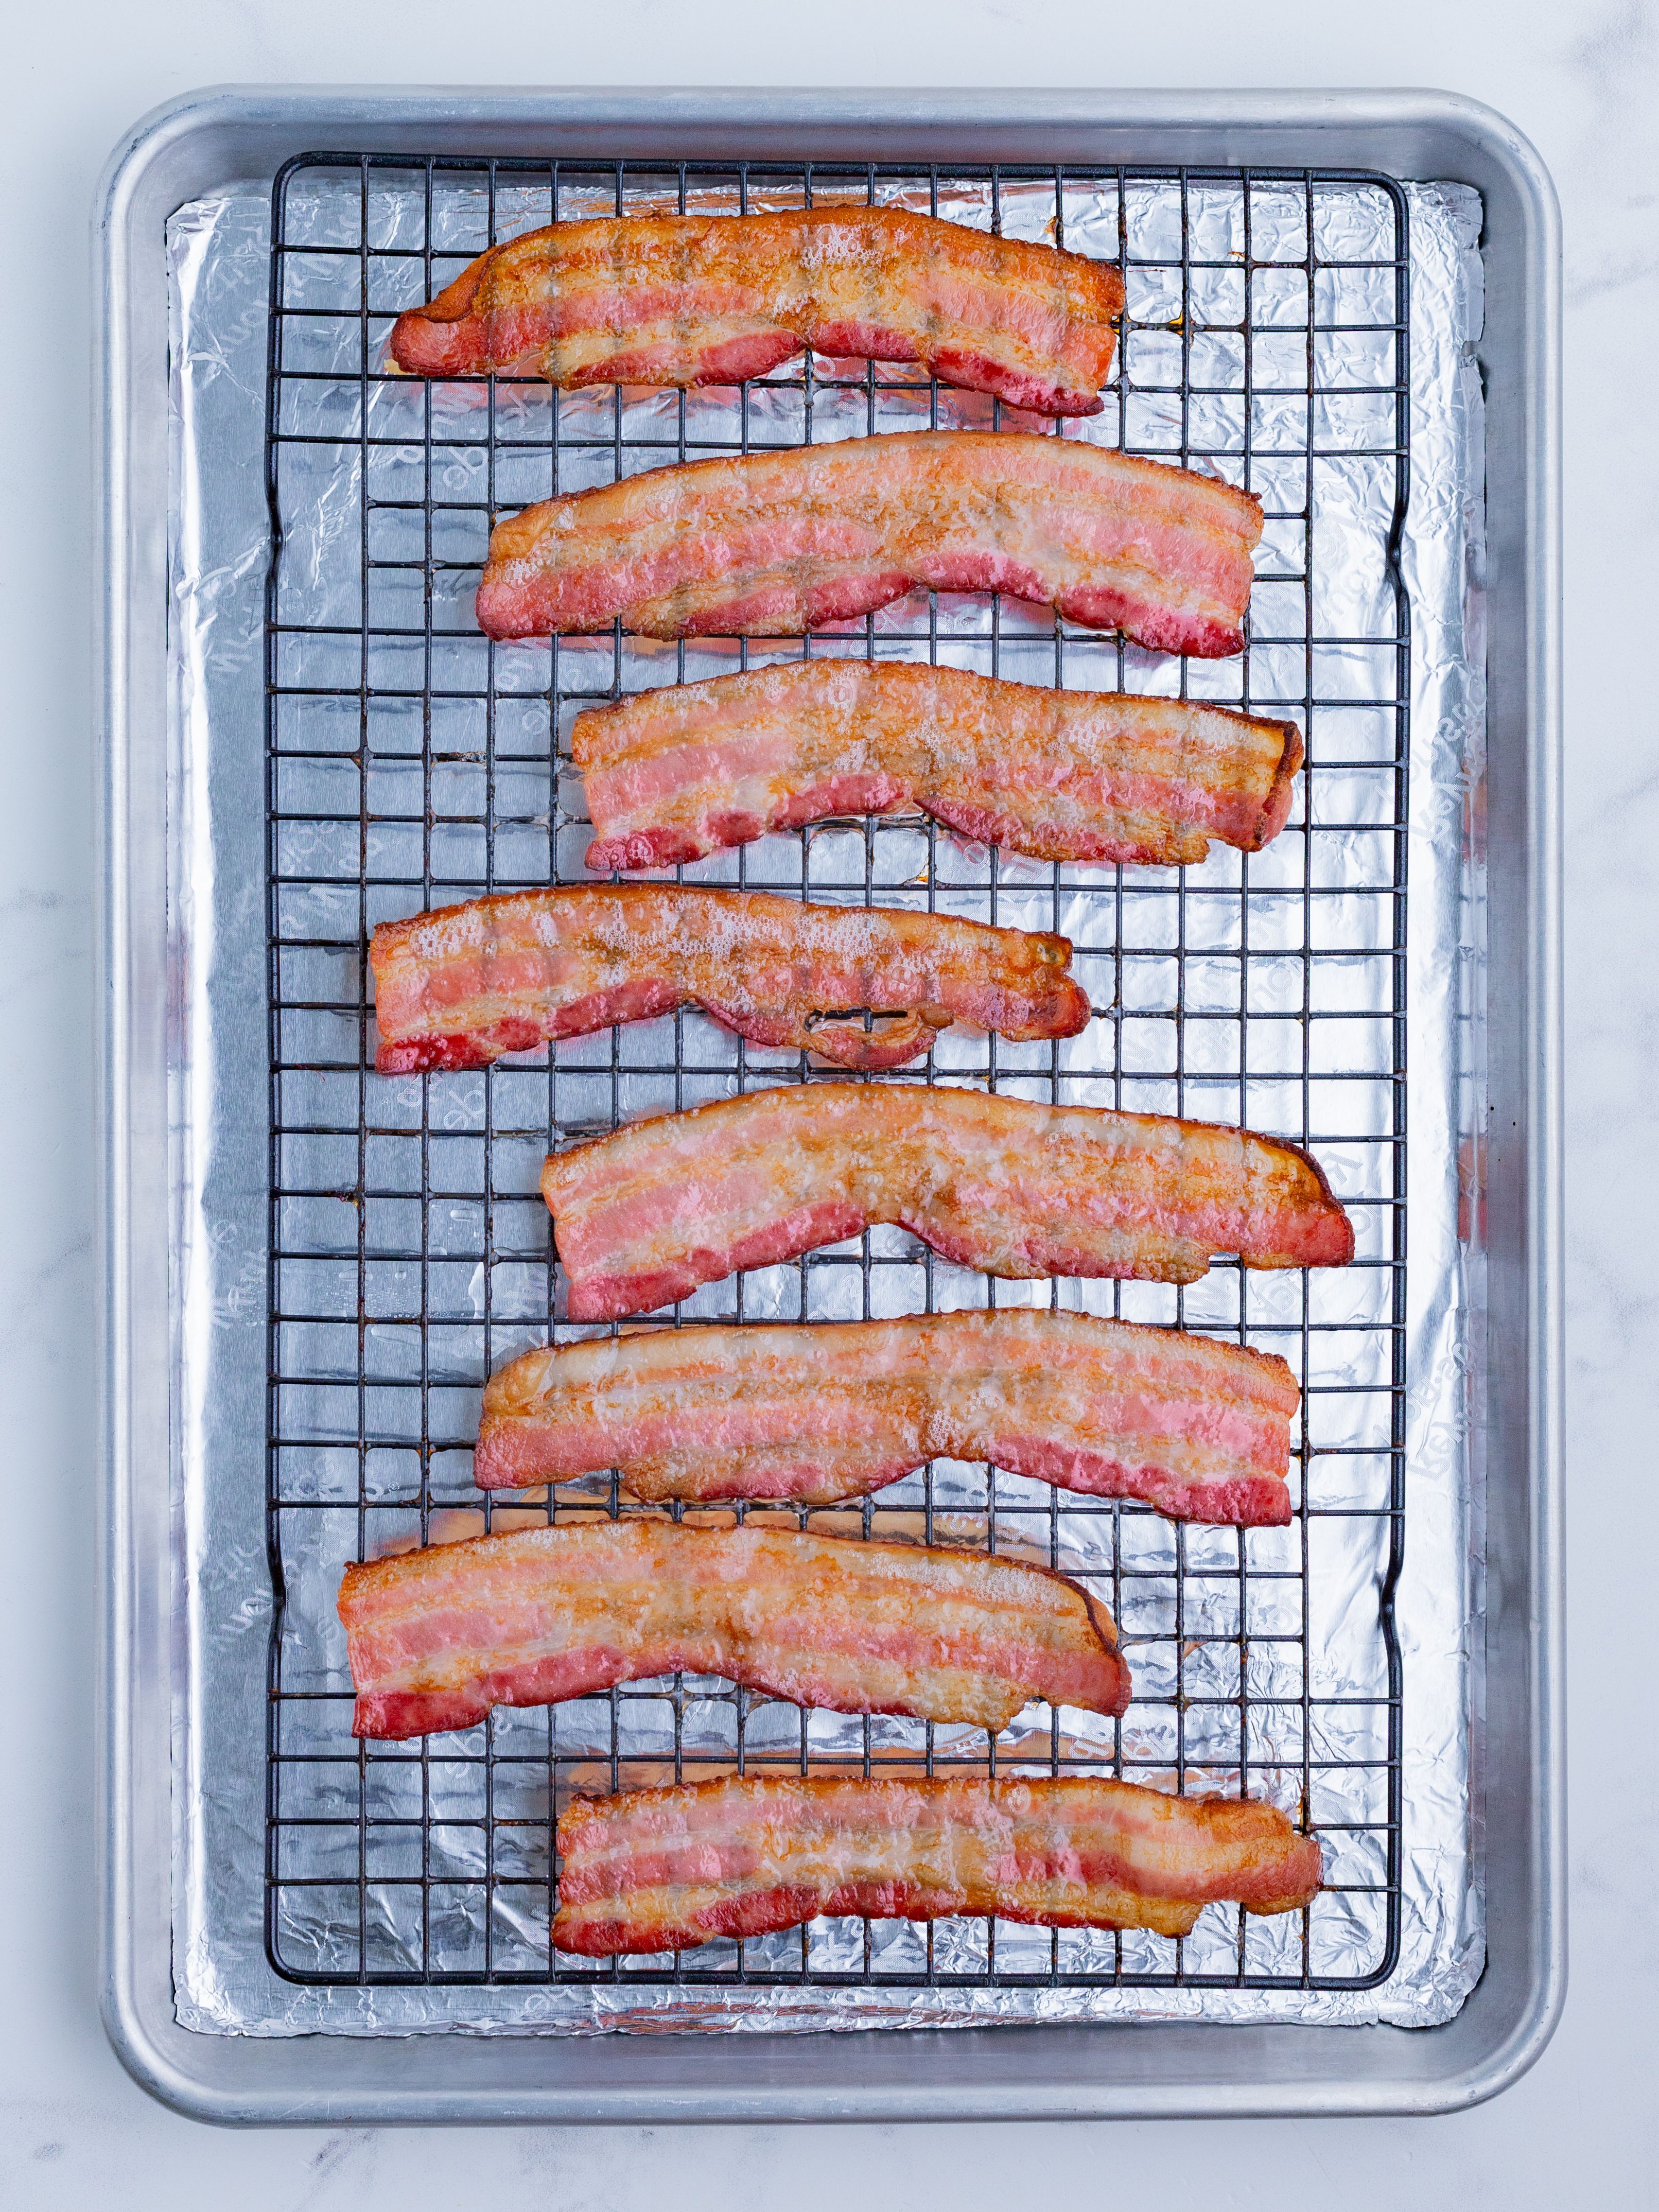 Bacon is cooked on a baking sheet with a wire rack to turn out crispy.